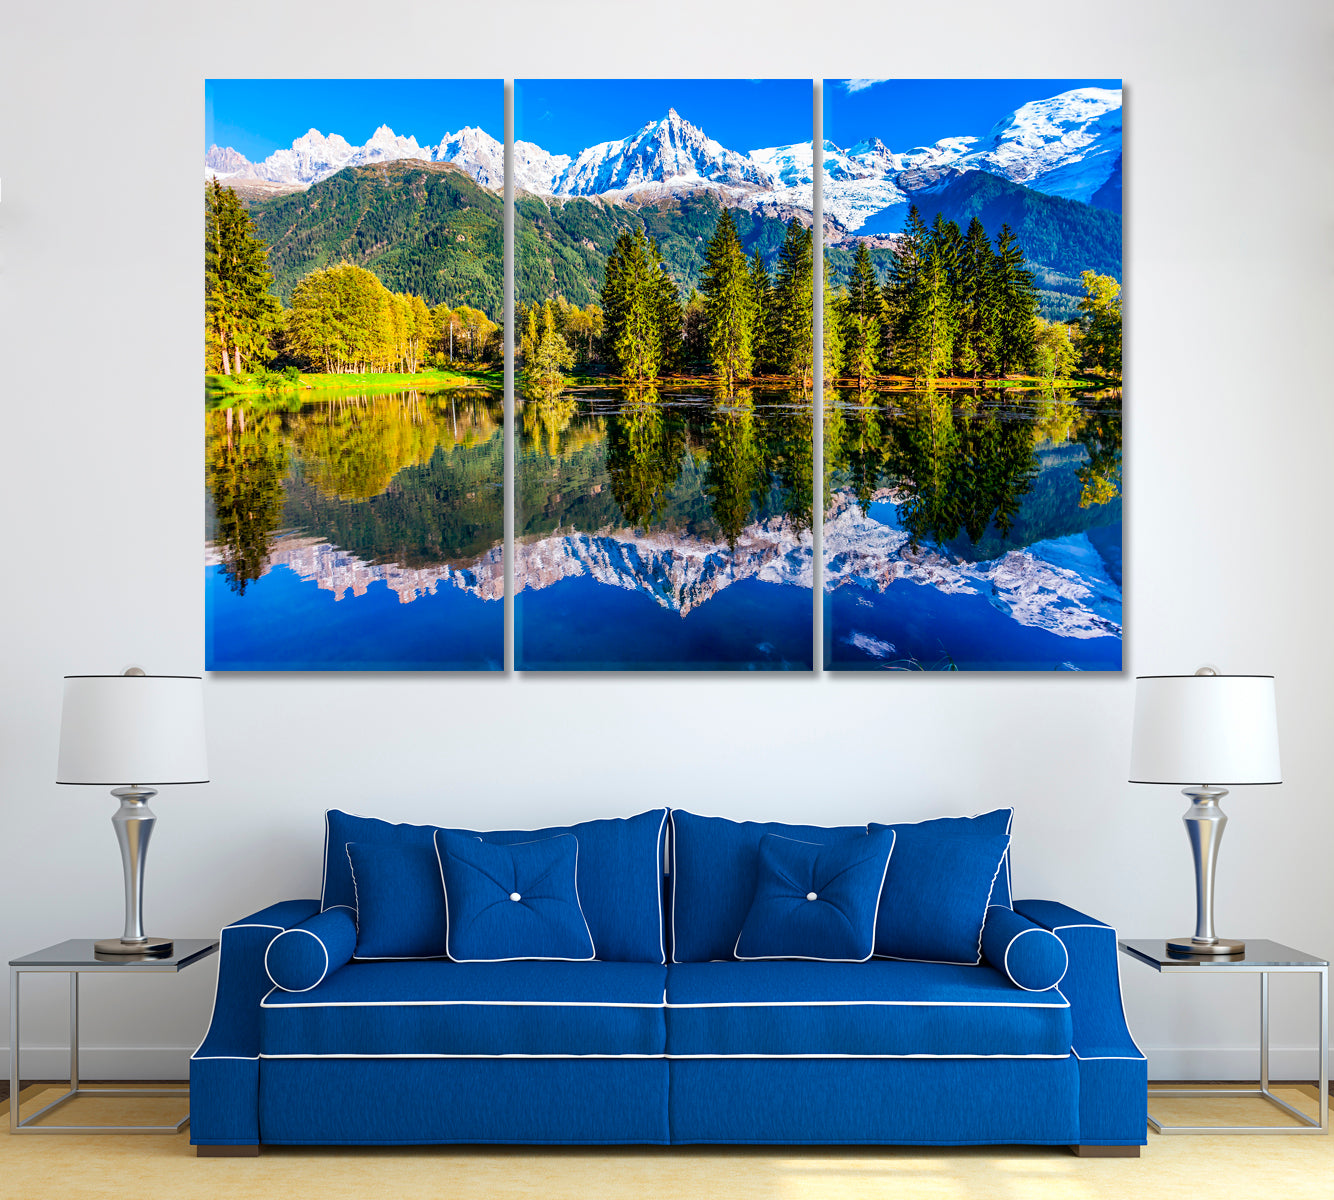 Reflections of Snowy Mountains in Lake Canvas Print ArtLexy 3 Panels 36"x24" inches 